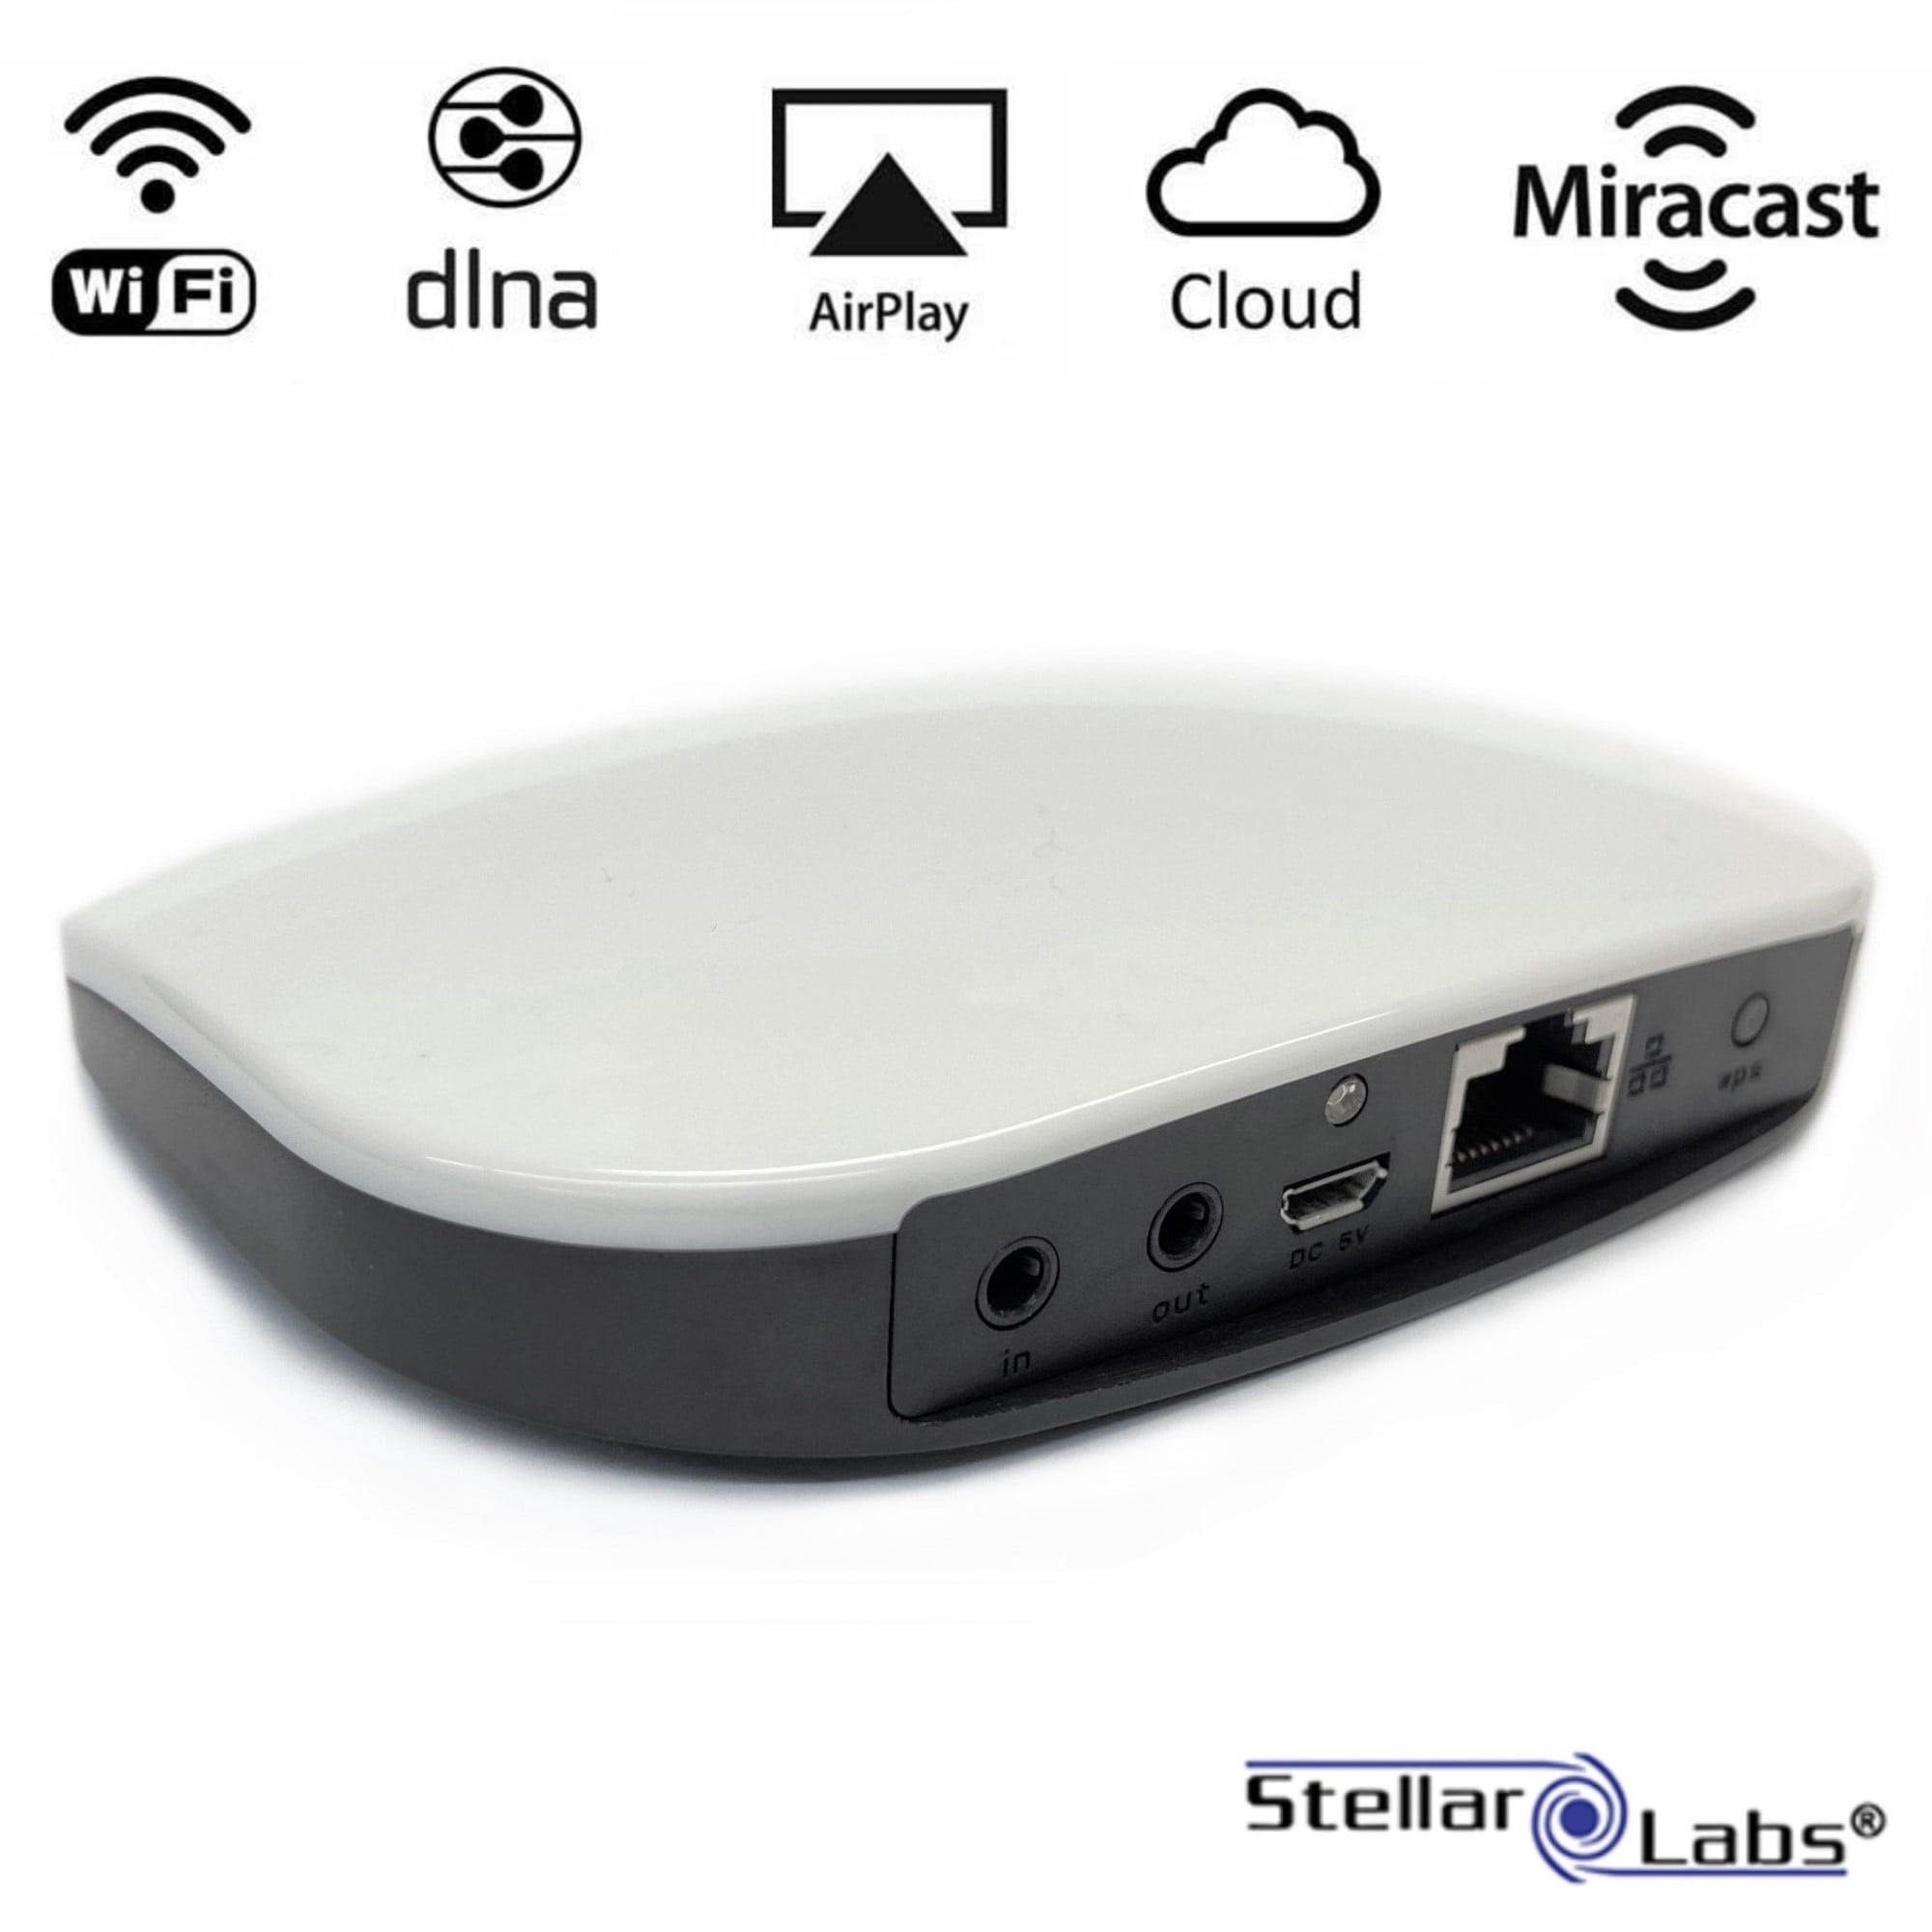 Leia Fitness Scepticisme Stellar Labs Wireless WiFi Audio Streaming Receiver Adapter, Stream Music  to Speaker Over Wi-Fi Airplay Receiver DLNA Chromecast Audio, Device  Compatible with iOS, Android and Windows - Walmart.com